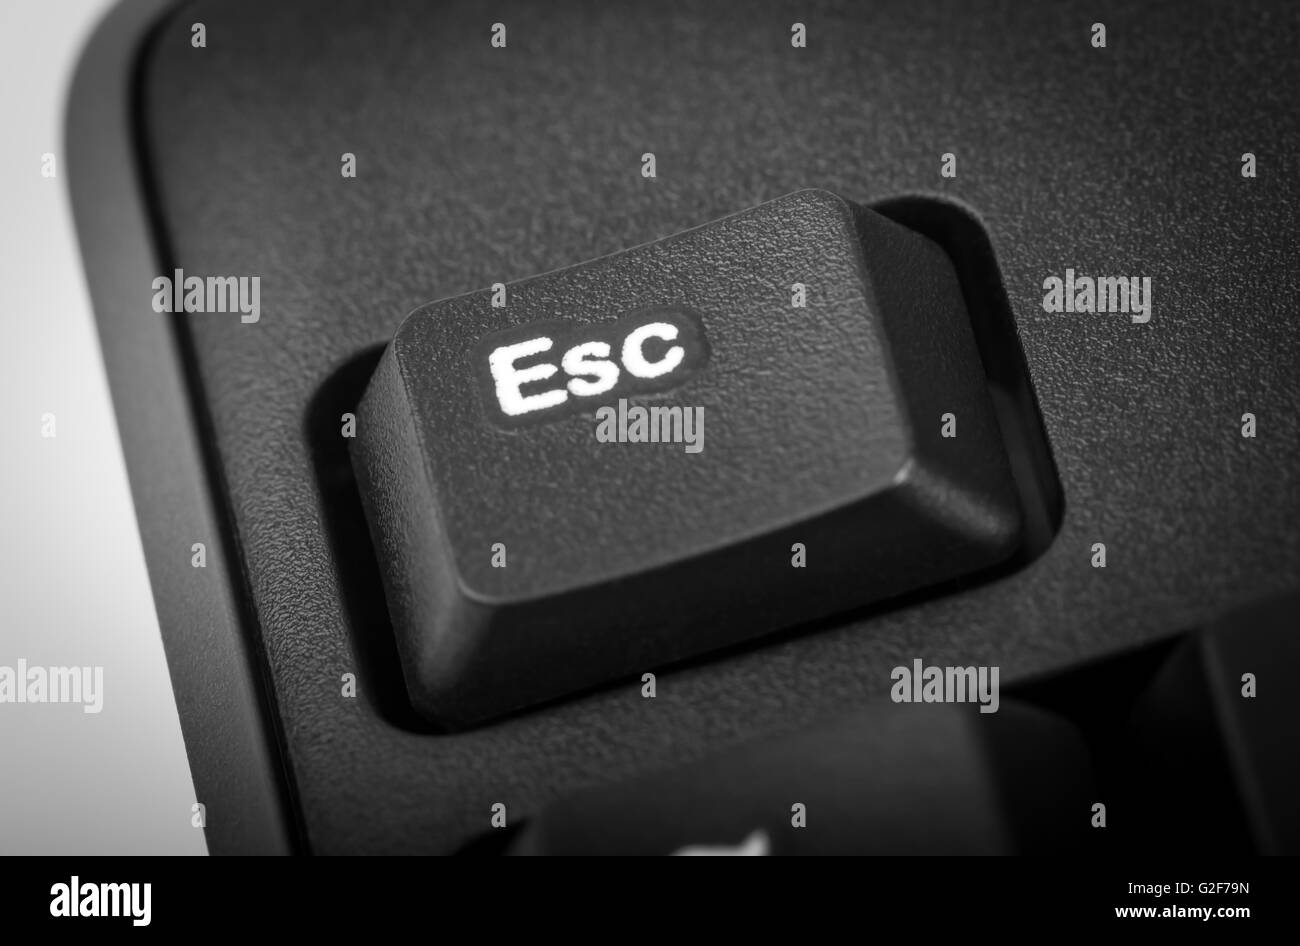 Electronic collection - detail black computer keyboard. The focus on Esc key. Stock Photo